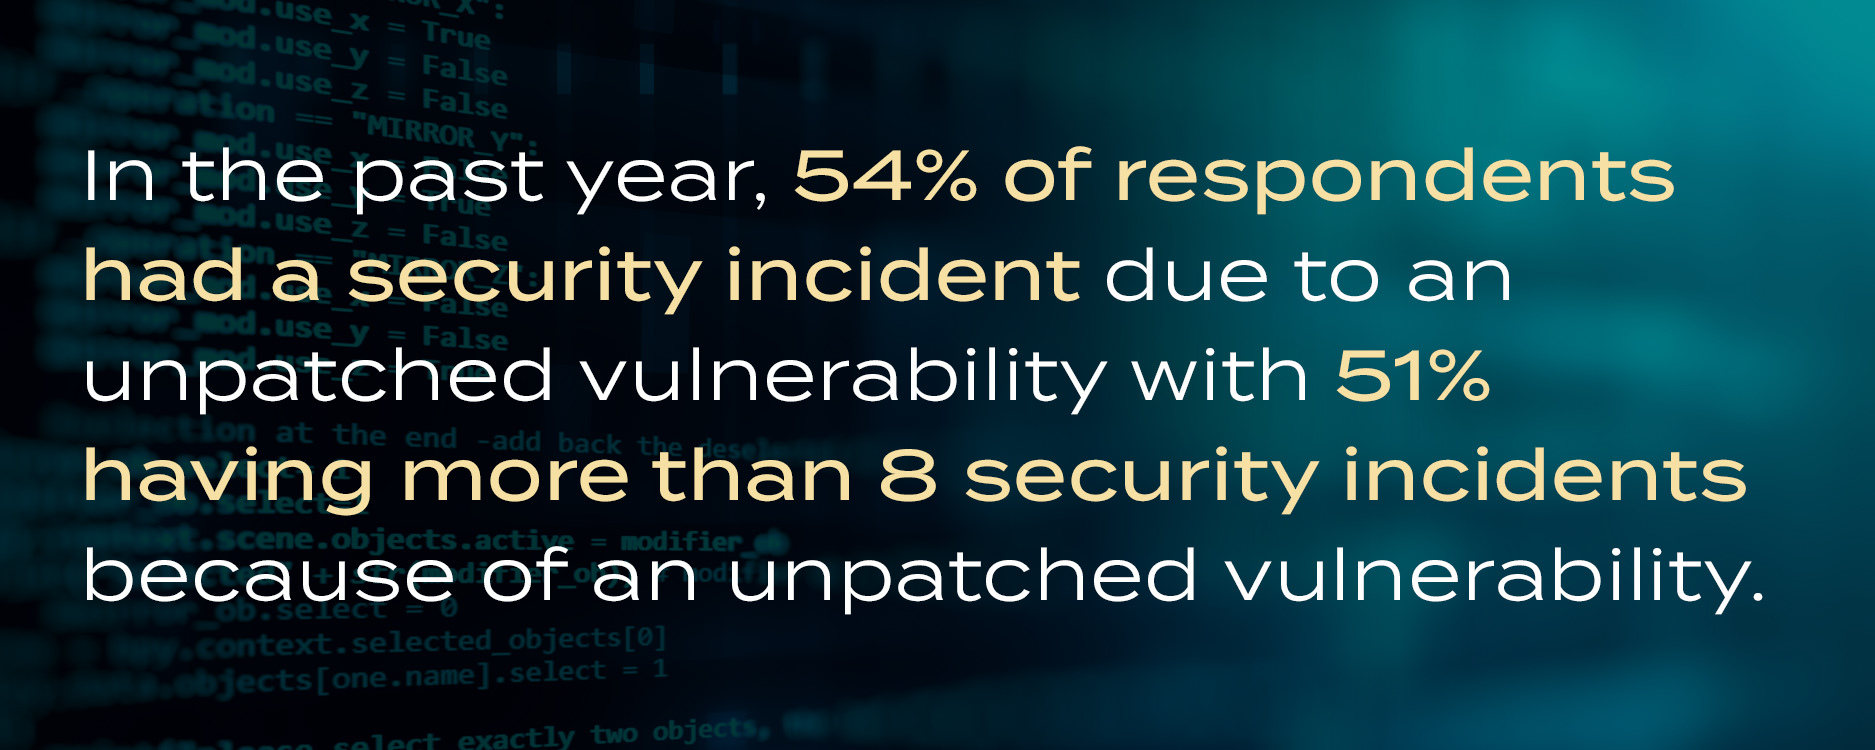 Unpatched Vulnerabilities Affect More than 50% of Companies